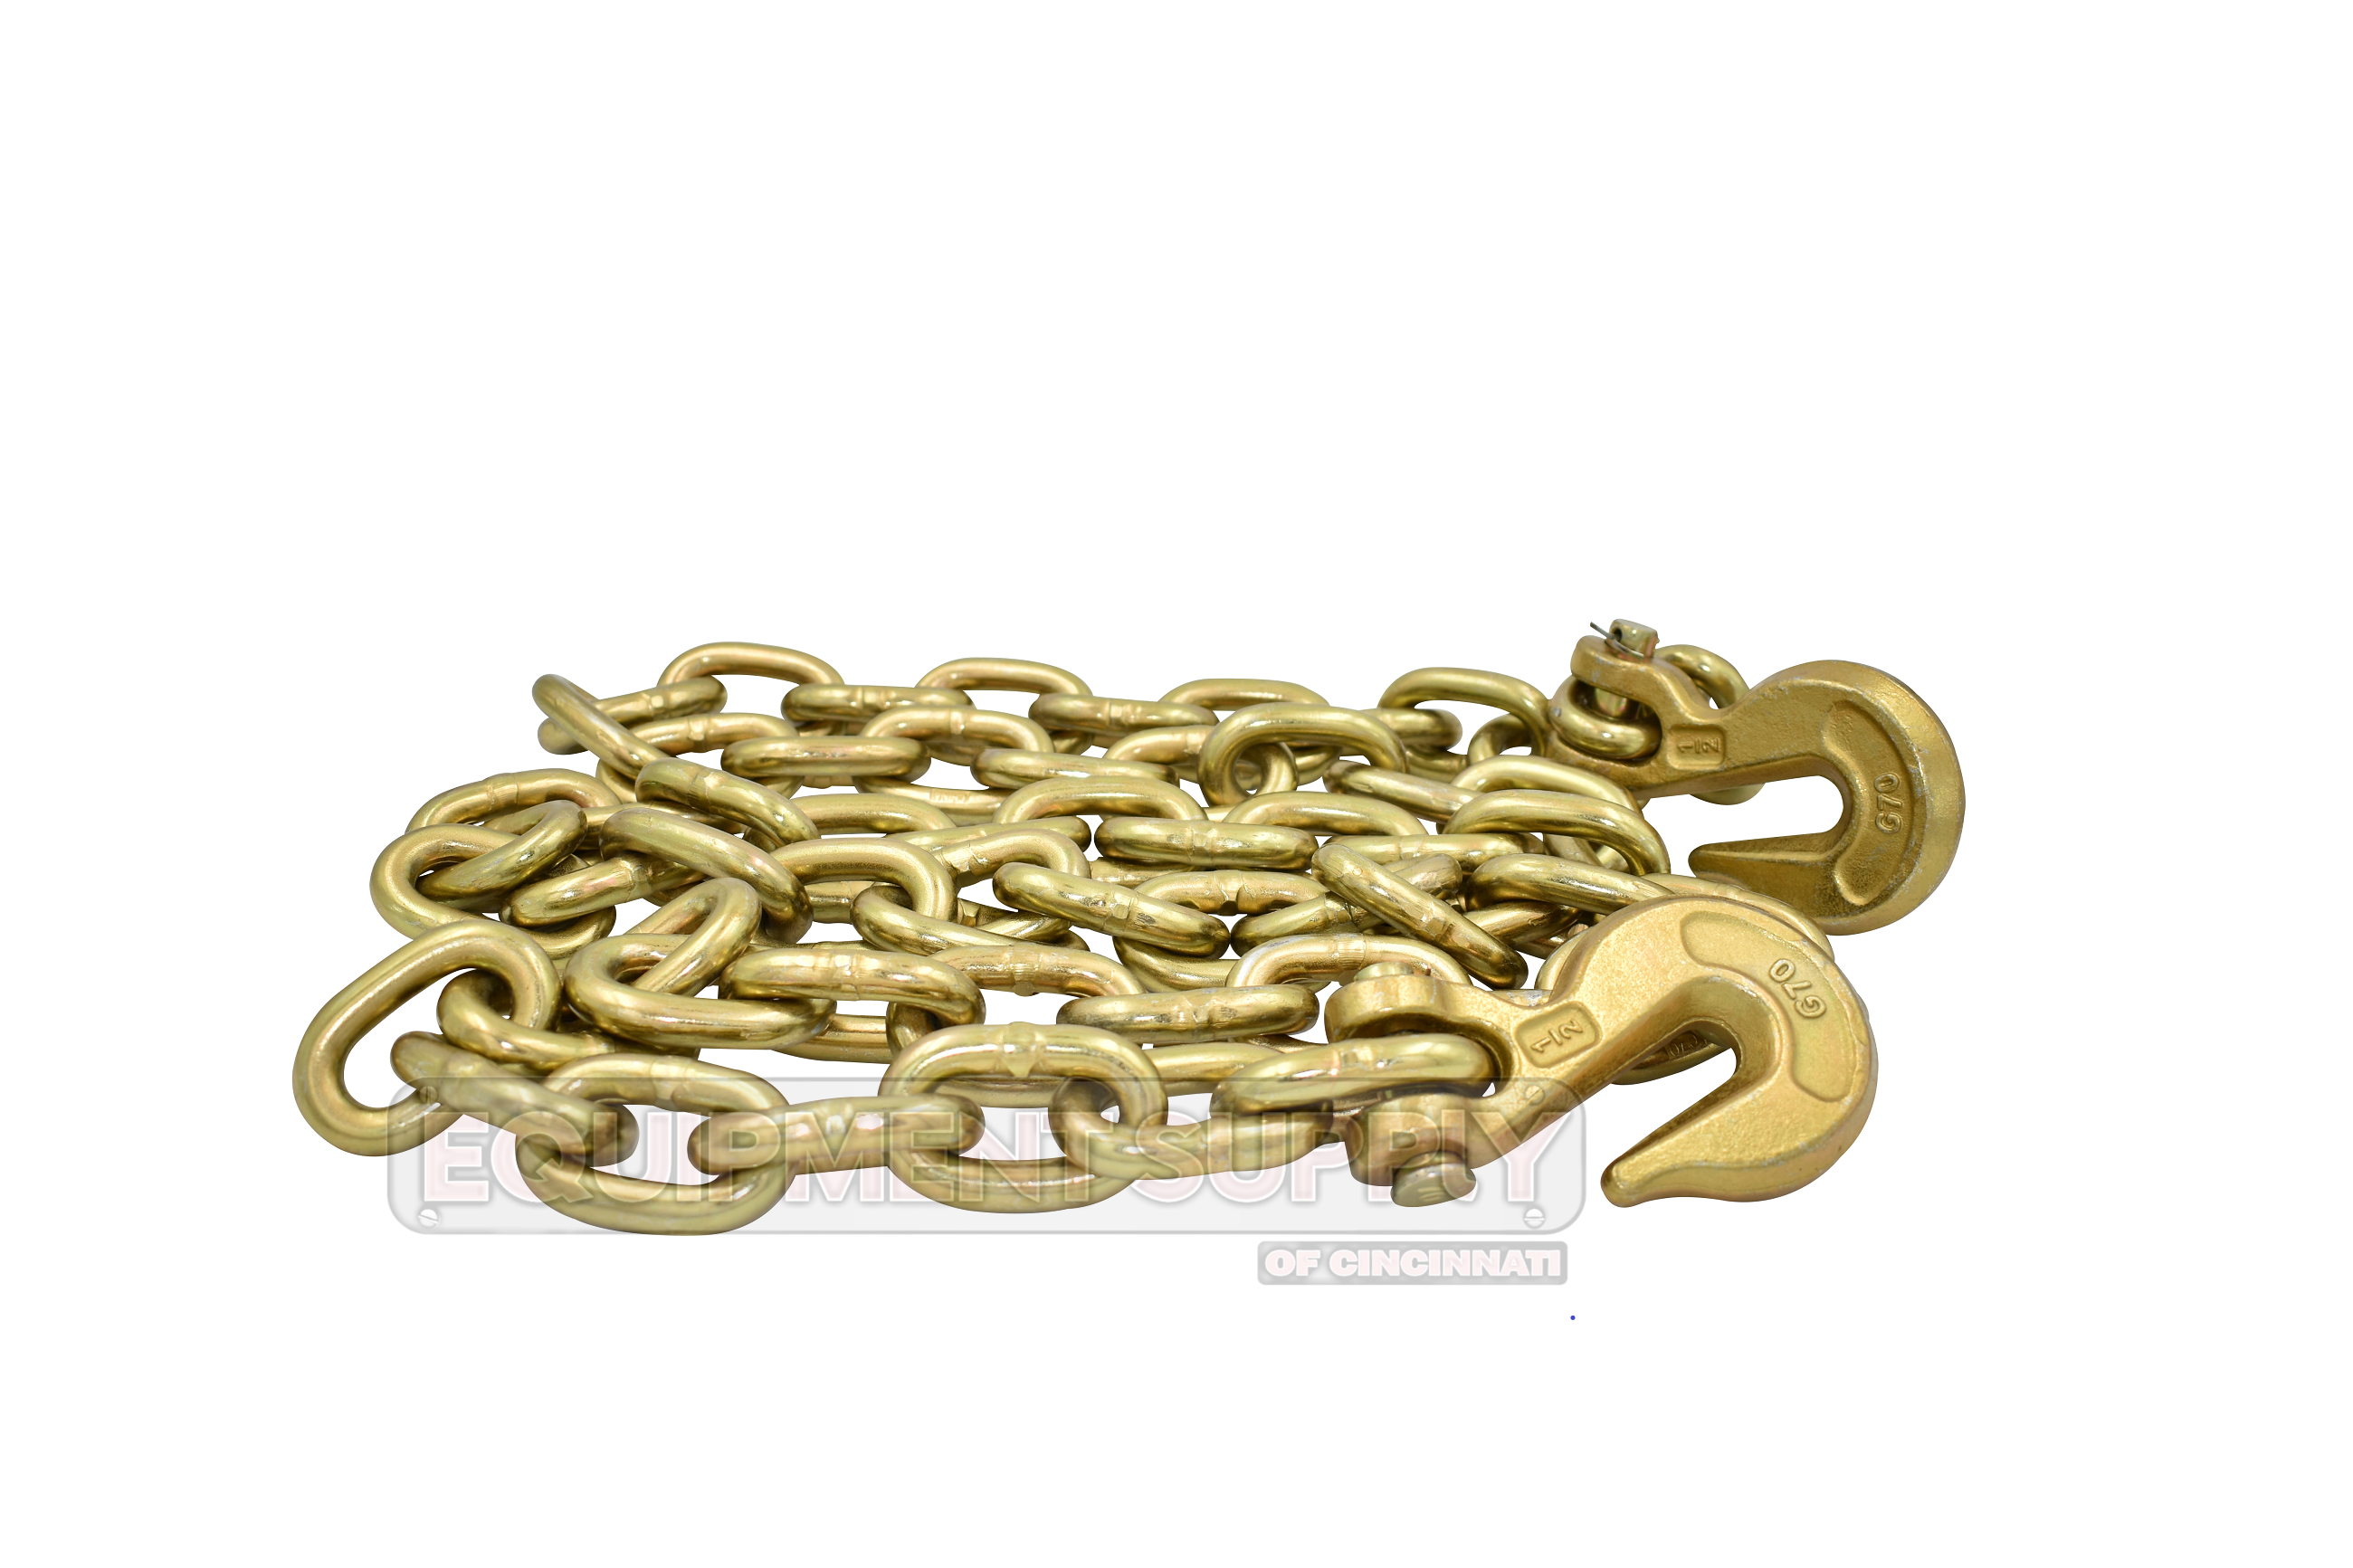 5/16" 10 Foot Feet Grade 70 Transport Binder Chain with Slip Hook and Grab Hook 